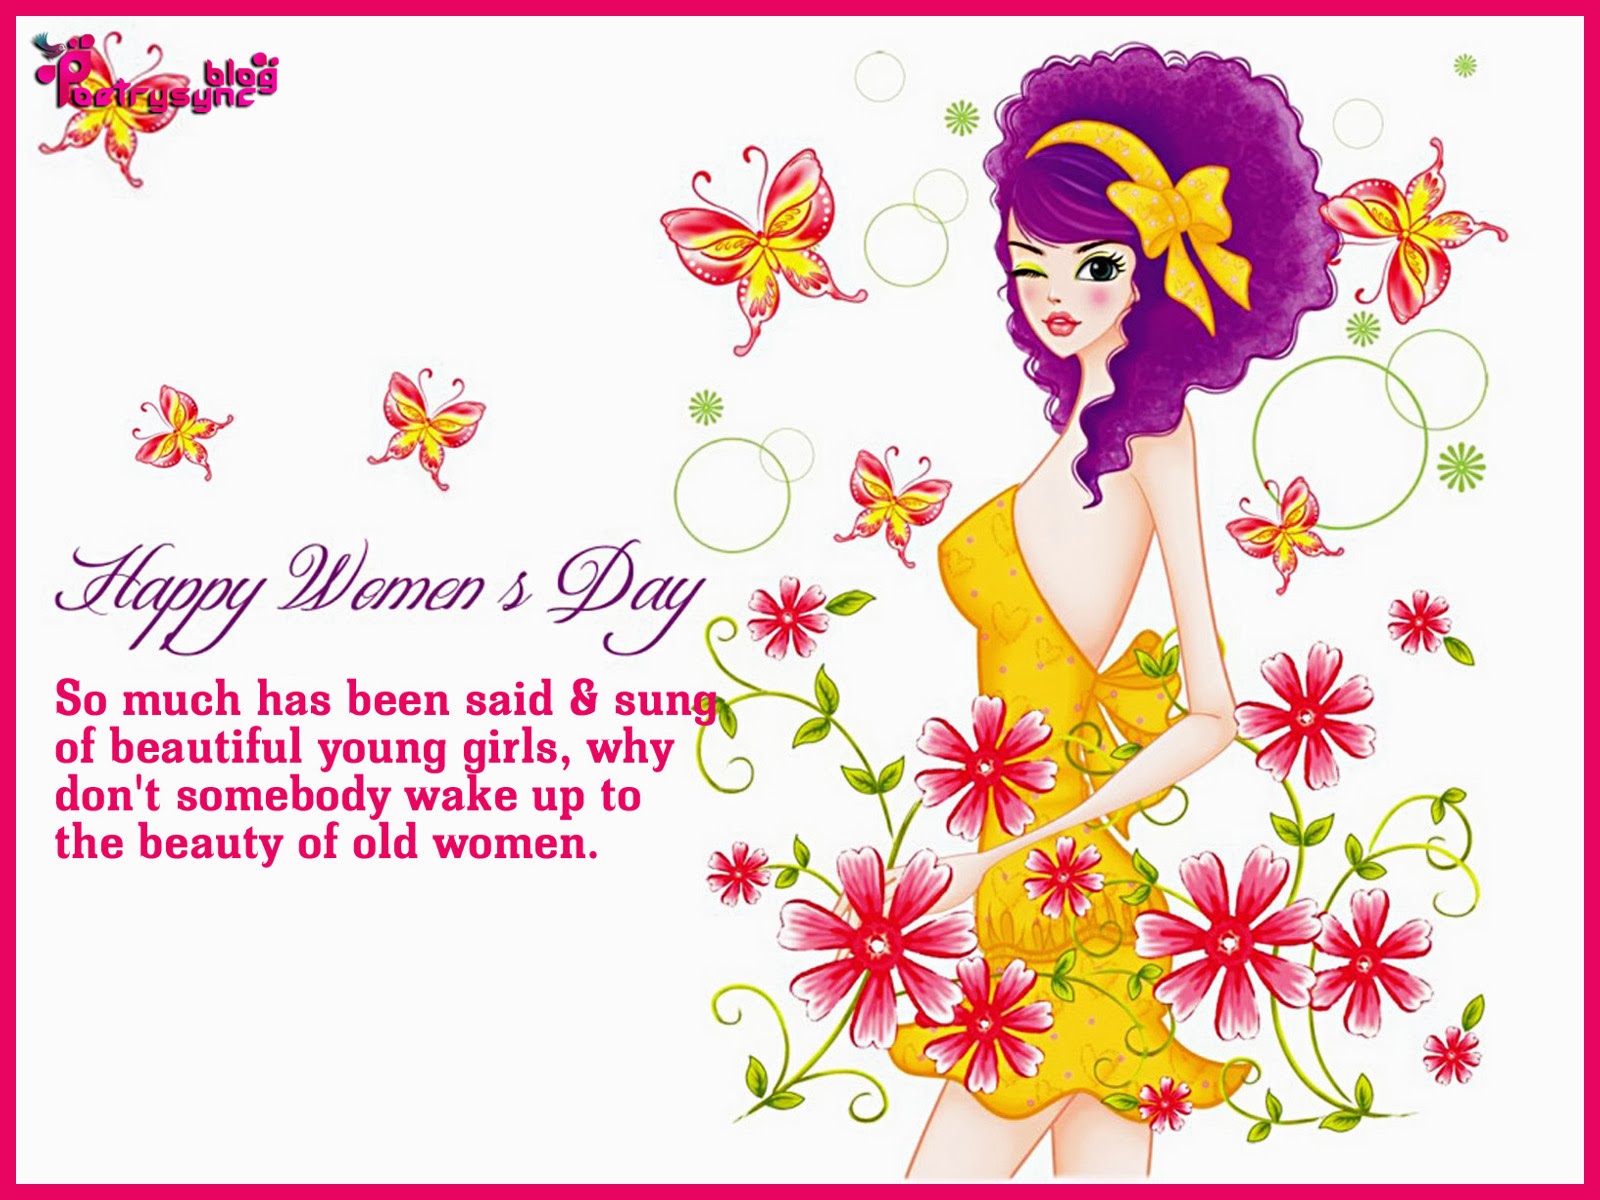 25+ Women's Day Whatsapp Status & Messages for Facebook ...